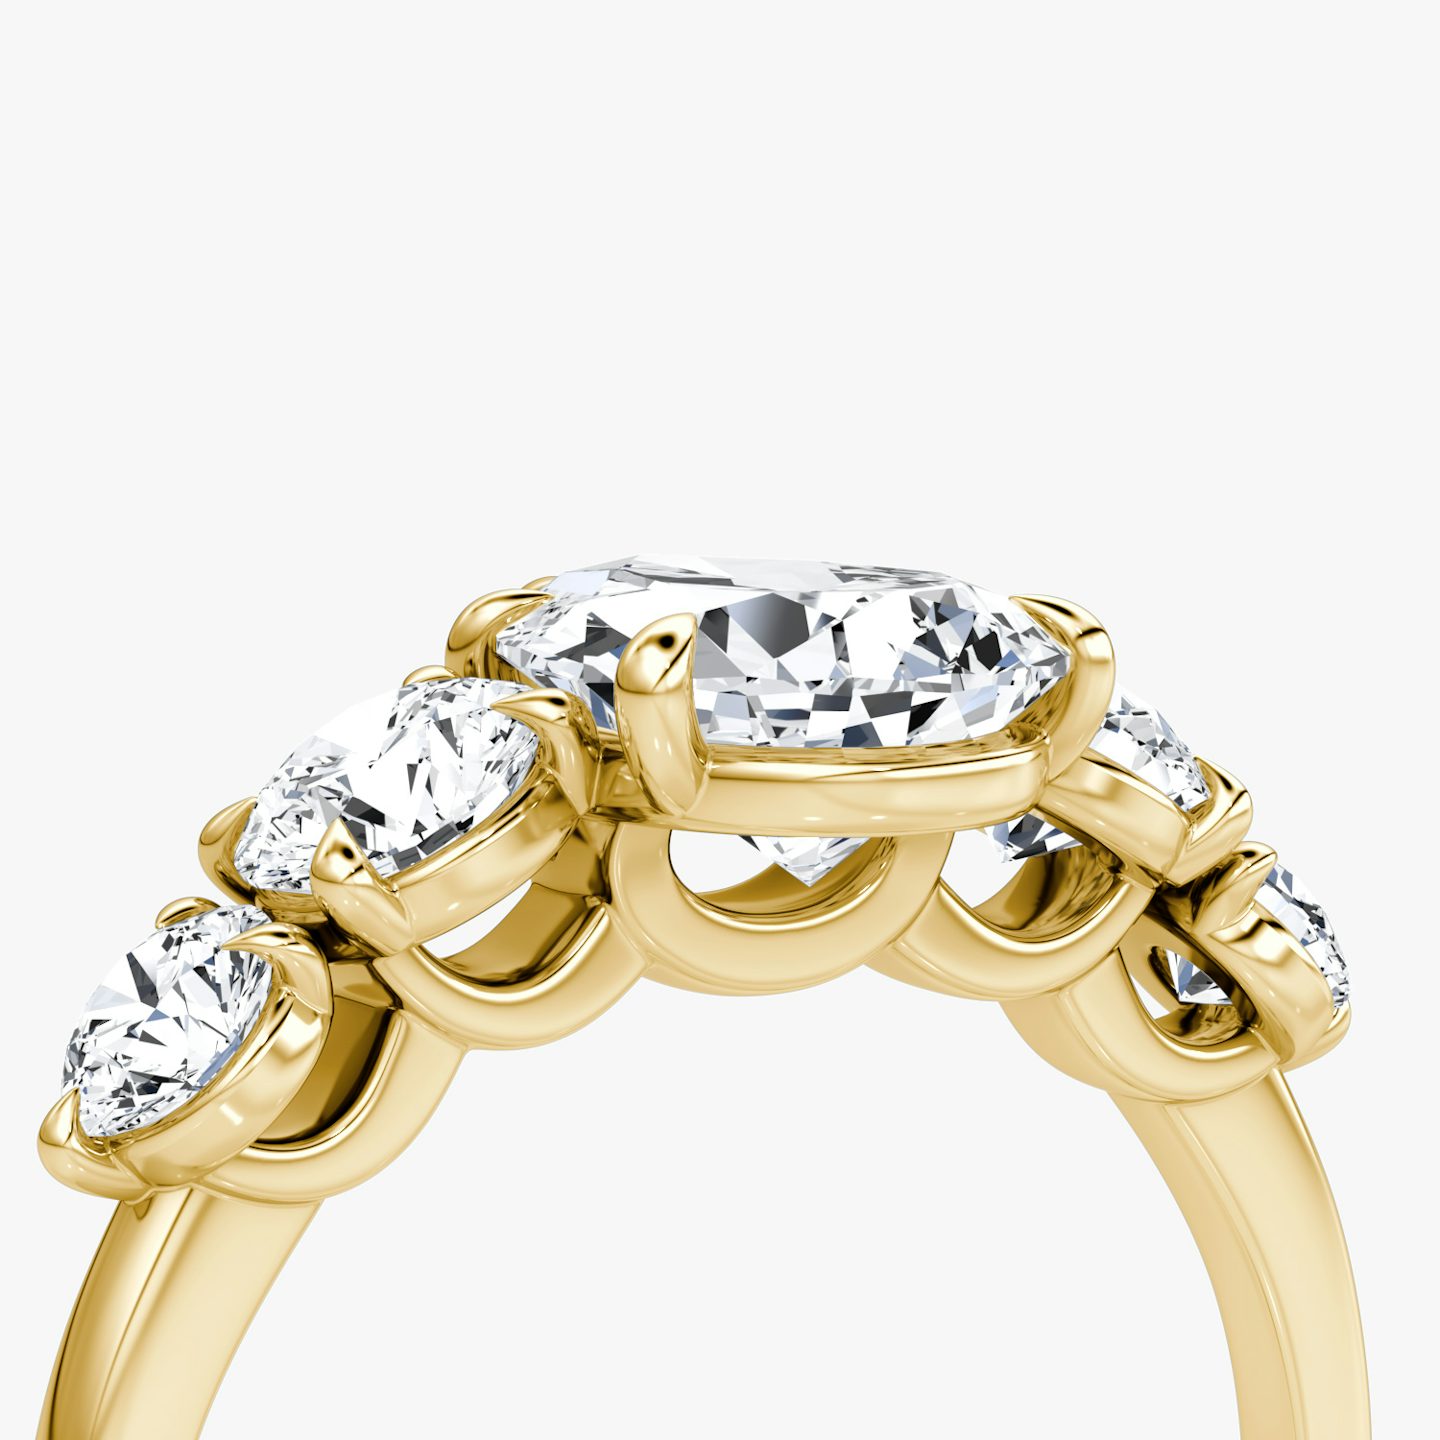 undefined | Pear | 18k | Yellow Gold | bandAccent: Plain | diamondOrientation: vertical | caratWeight: other